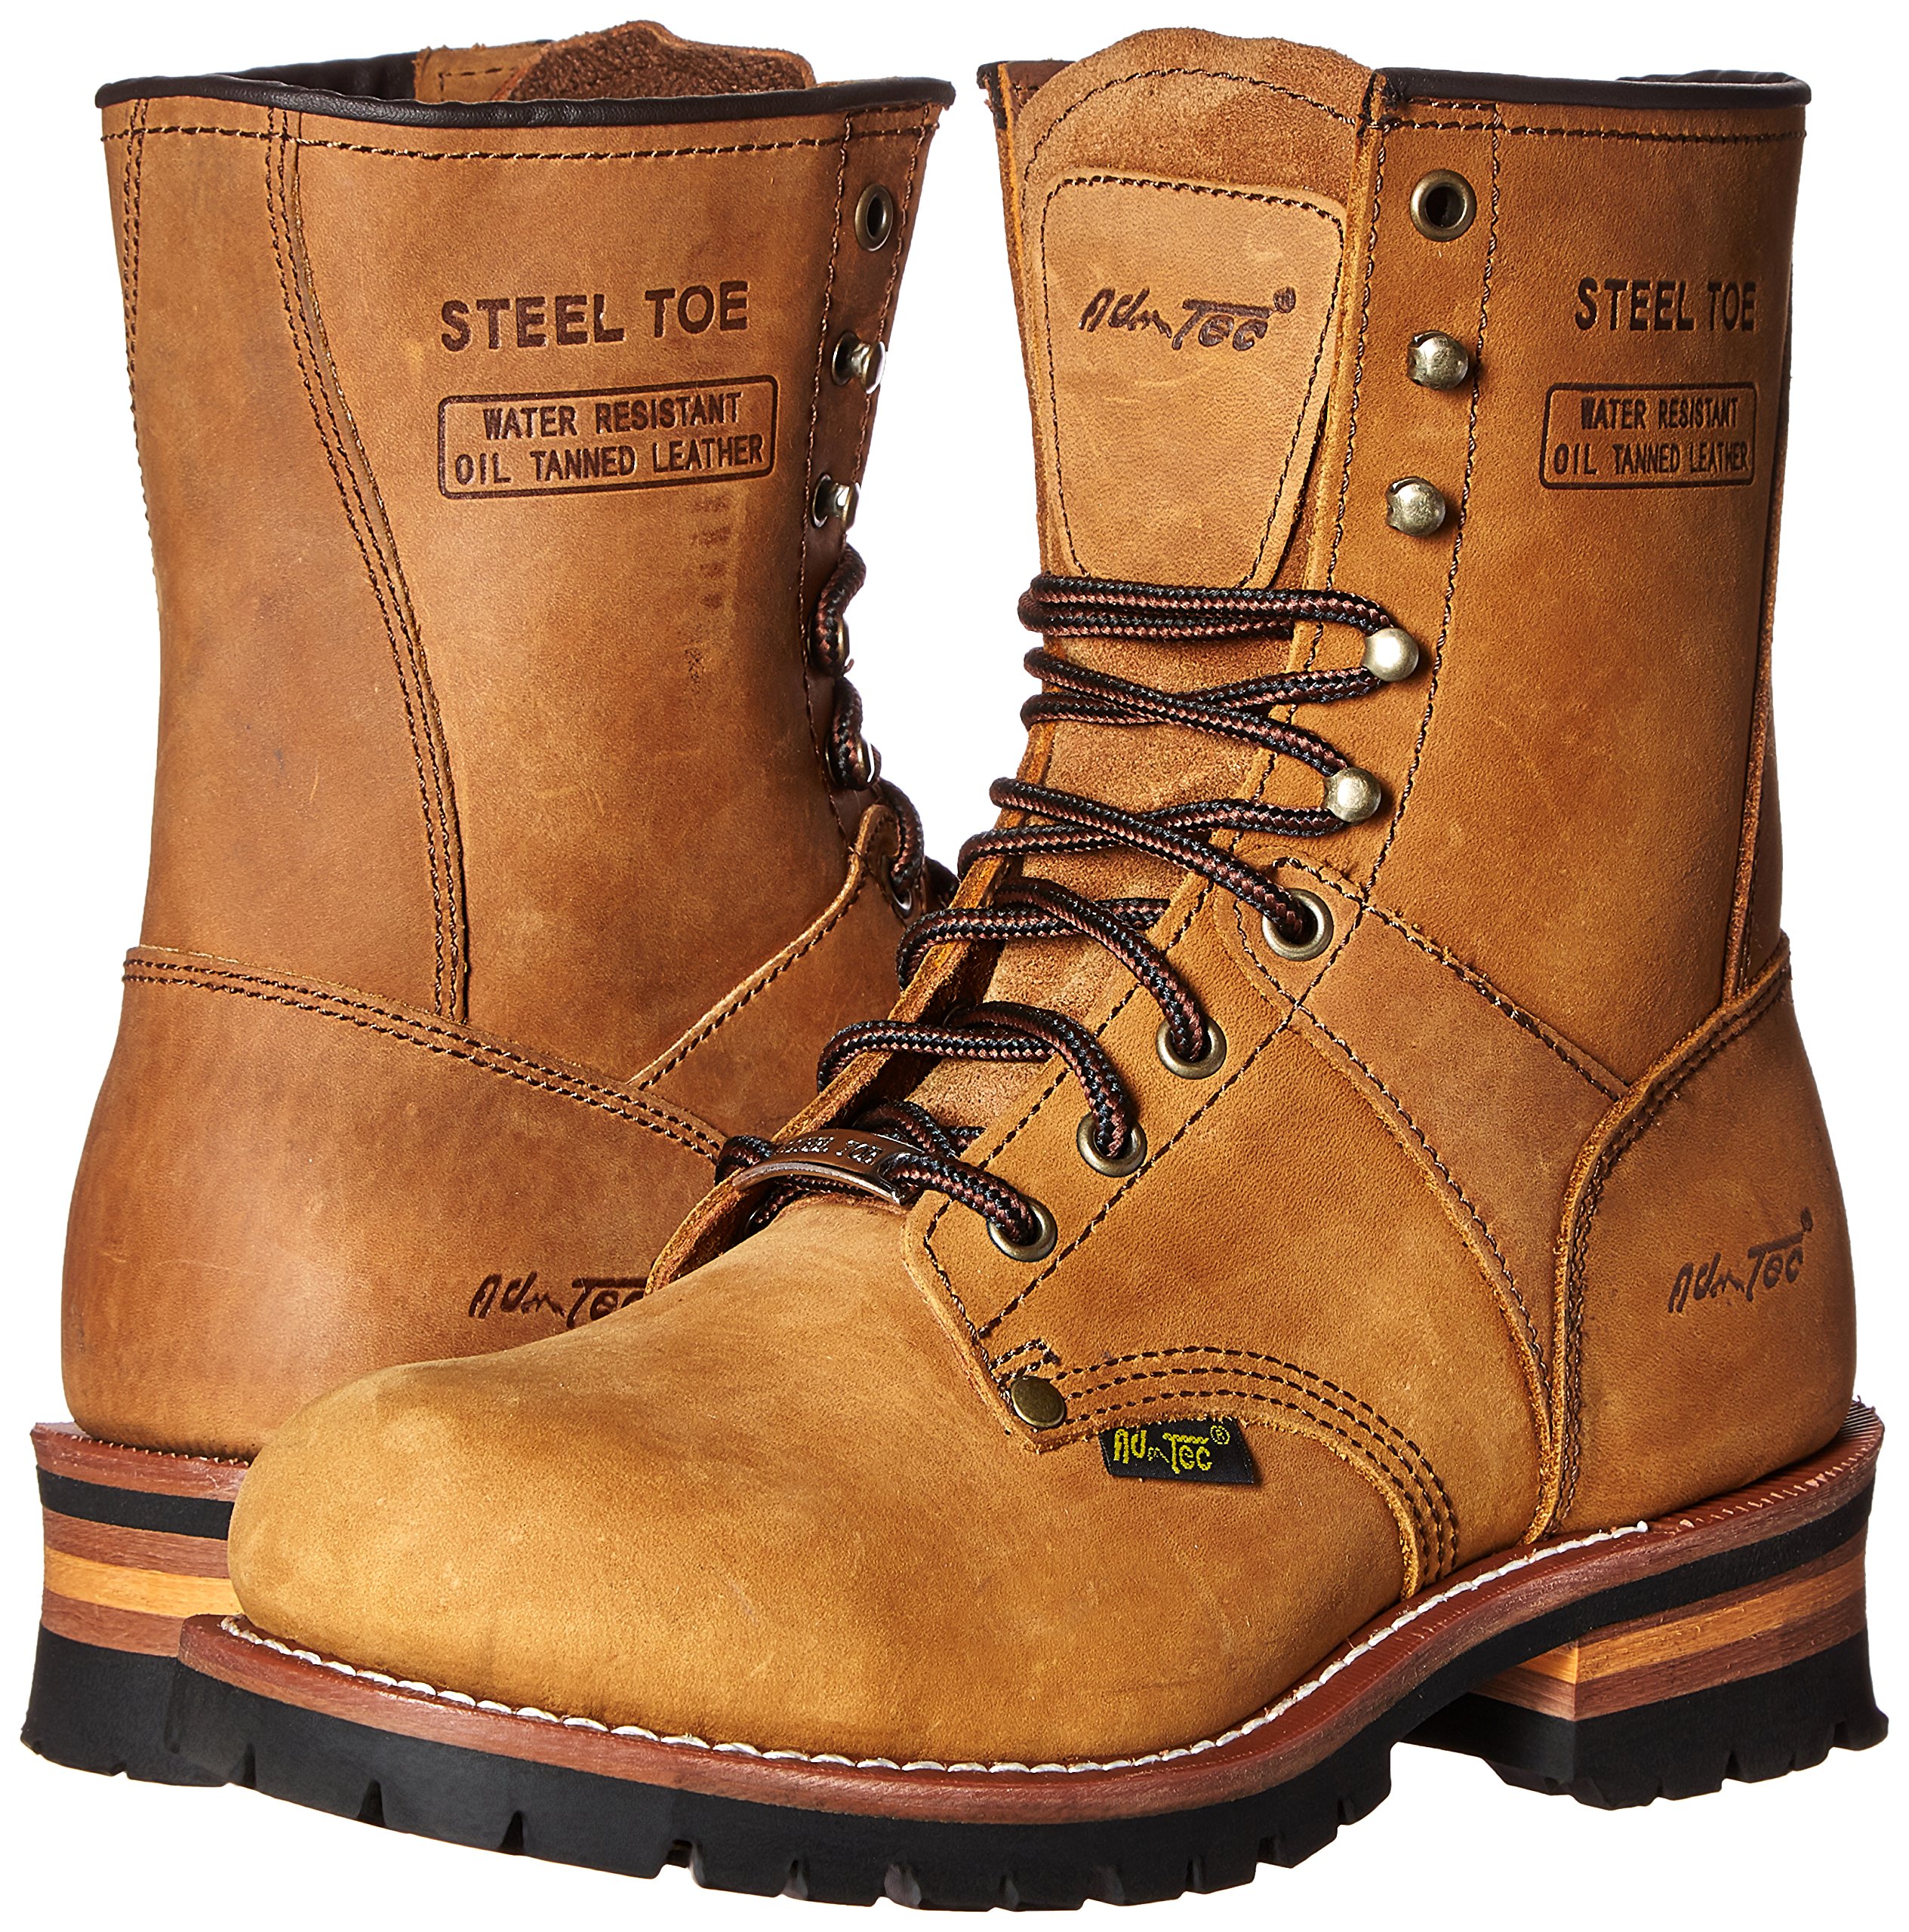 Ad Tec 9in Super Logger Leather Work Boots for Men - Steel Toe, Oil Resistant Lug Sole